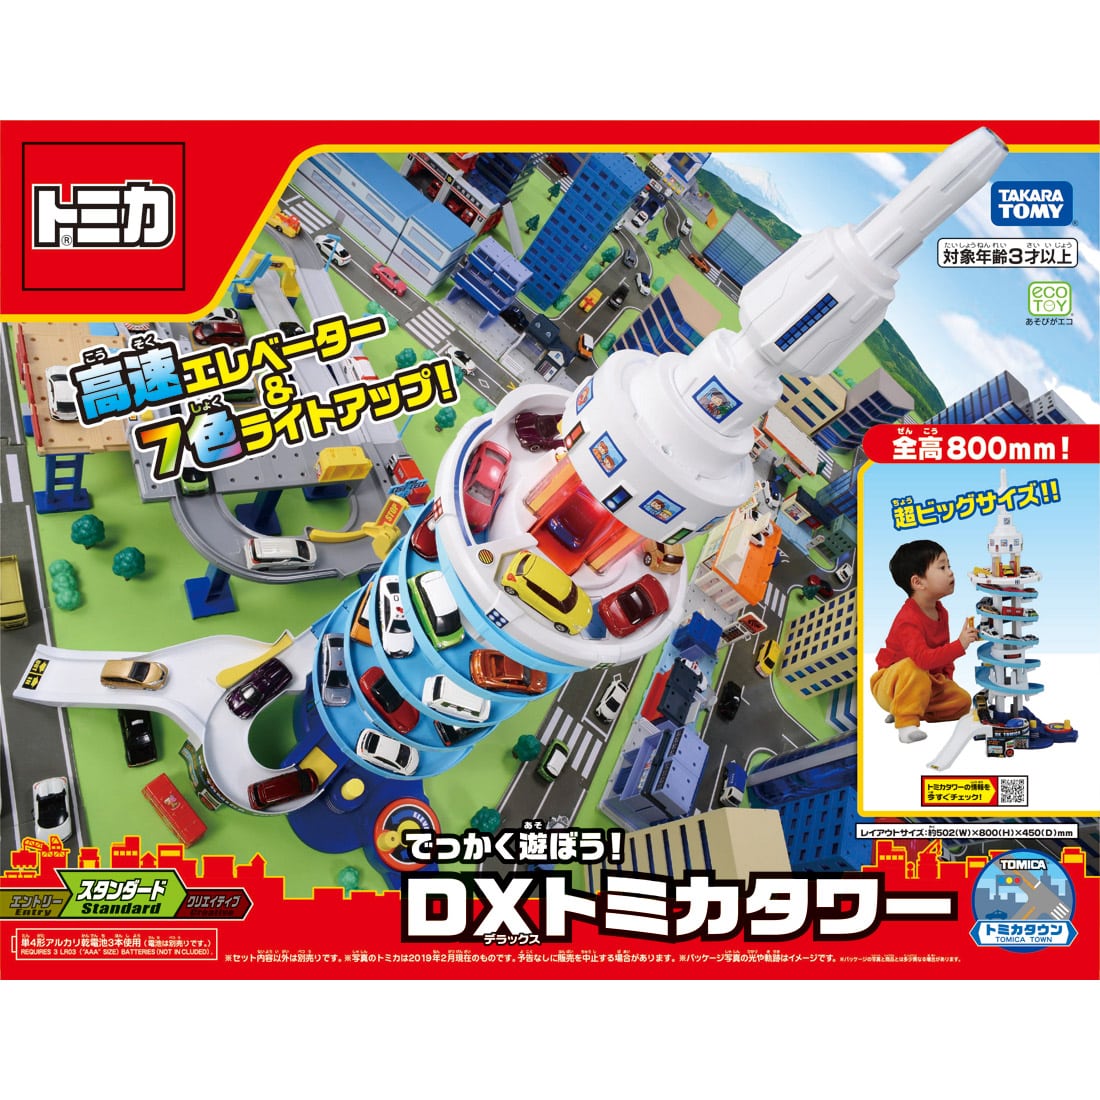 Let S Play Big Dx Tomica Tower Toy Tomica Wiki Fandom